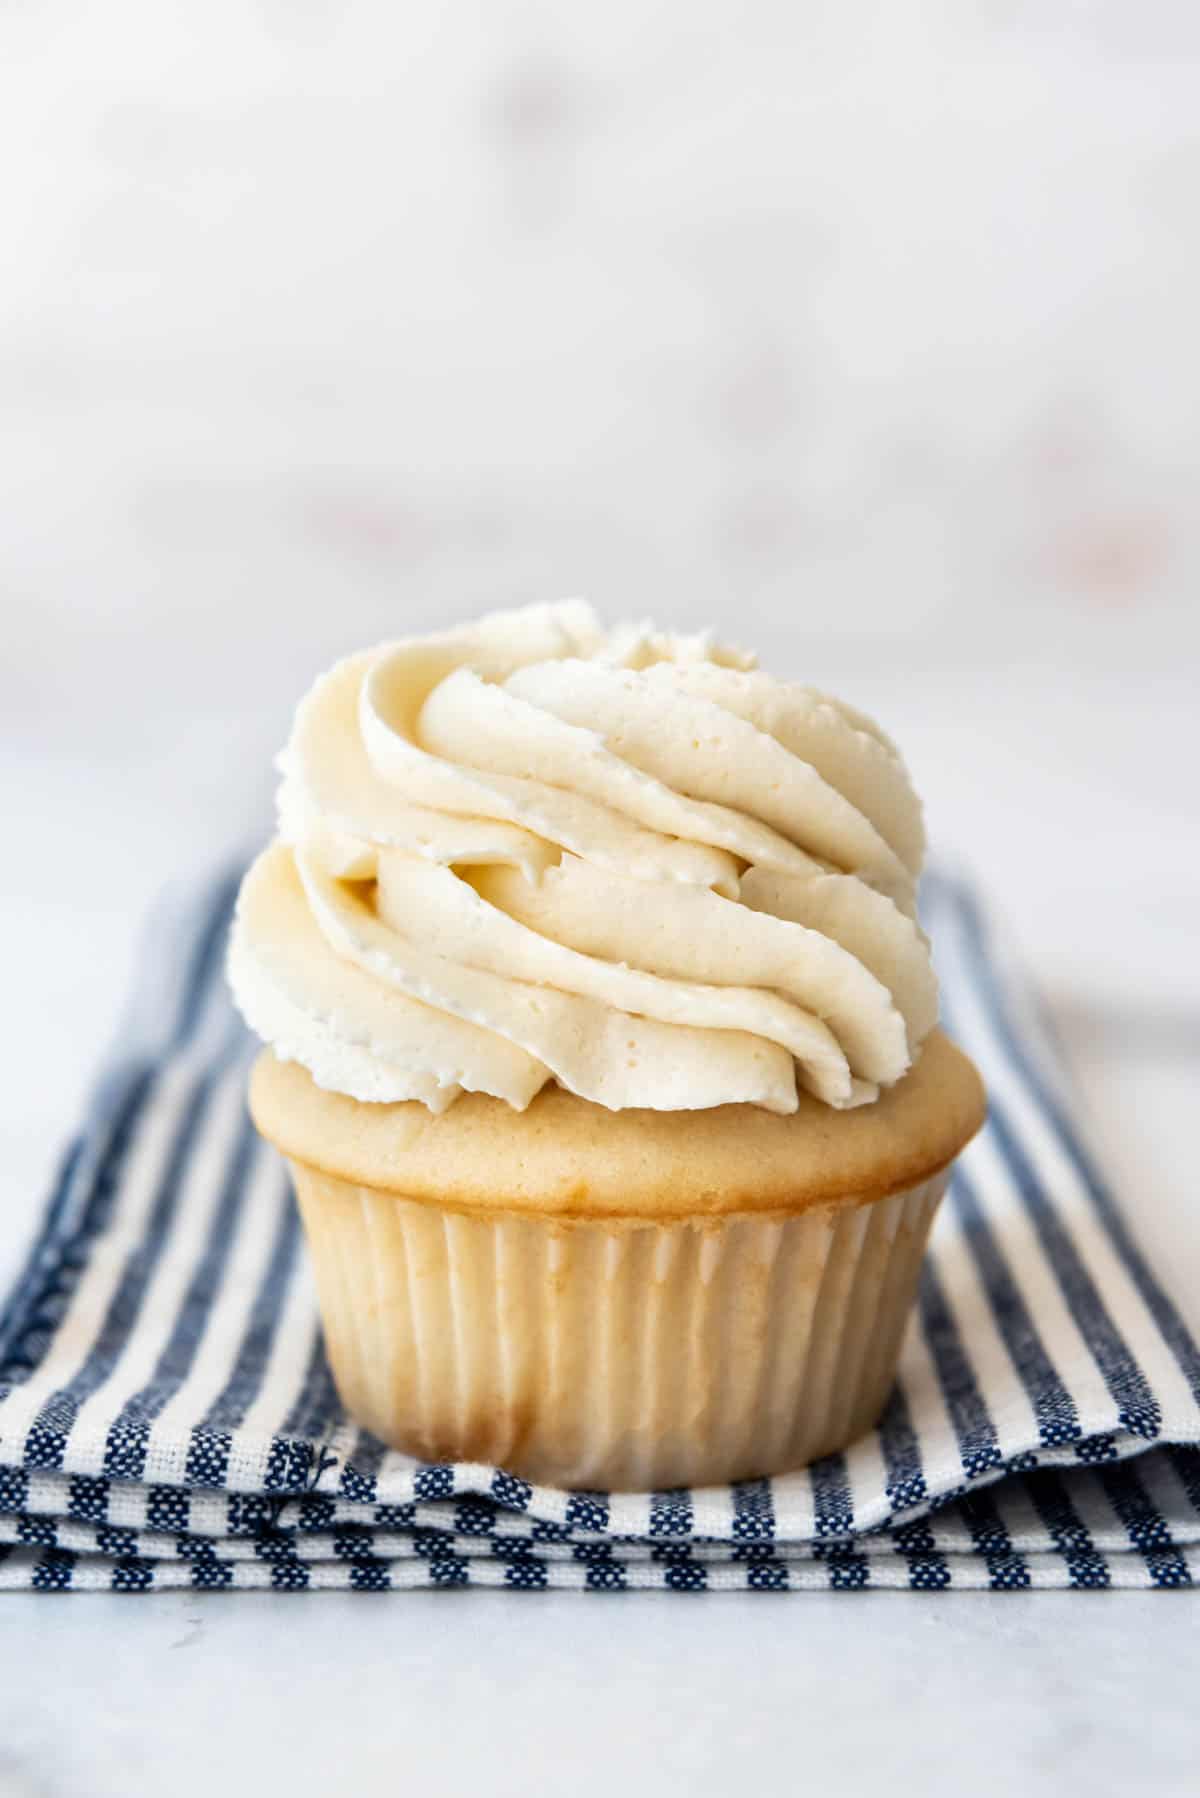 A white cupcake topped with swirls of white Swiss meringue buttercream.